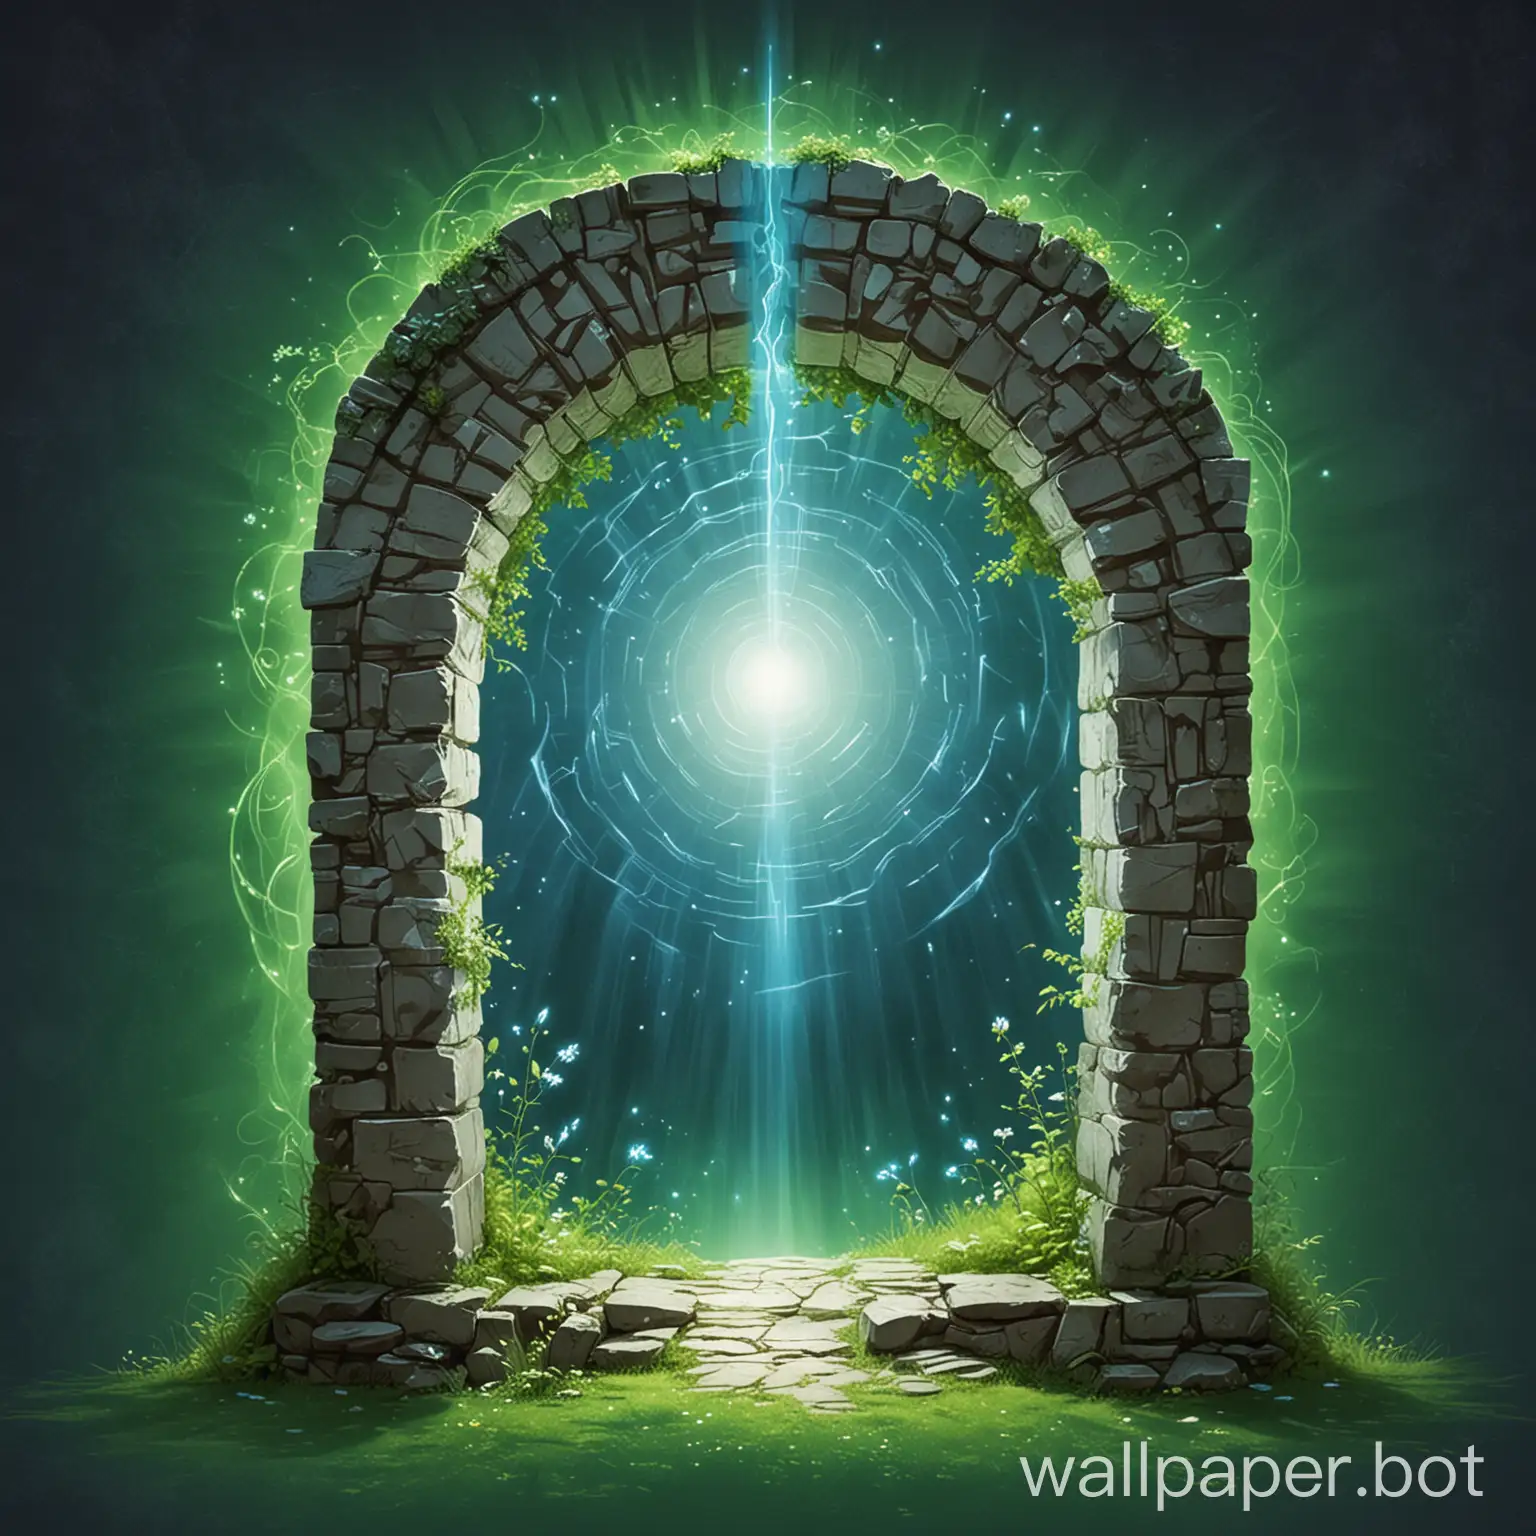 Draw a magical portal from which emanates blue-white light on a green background.